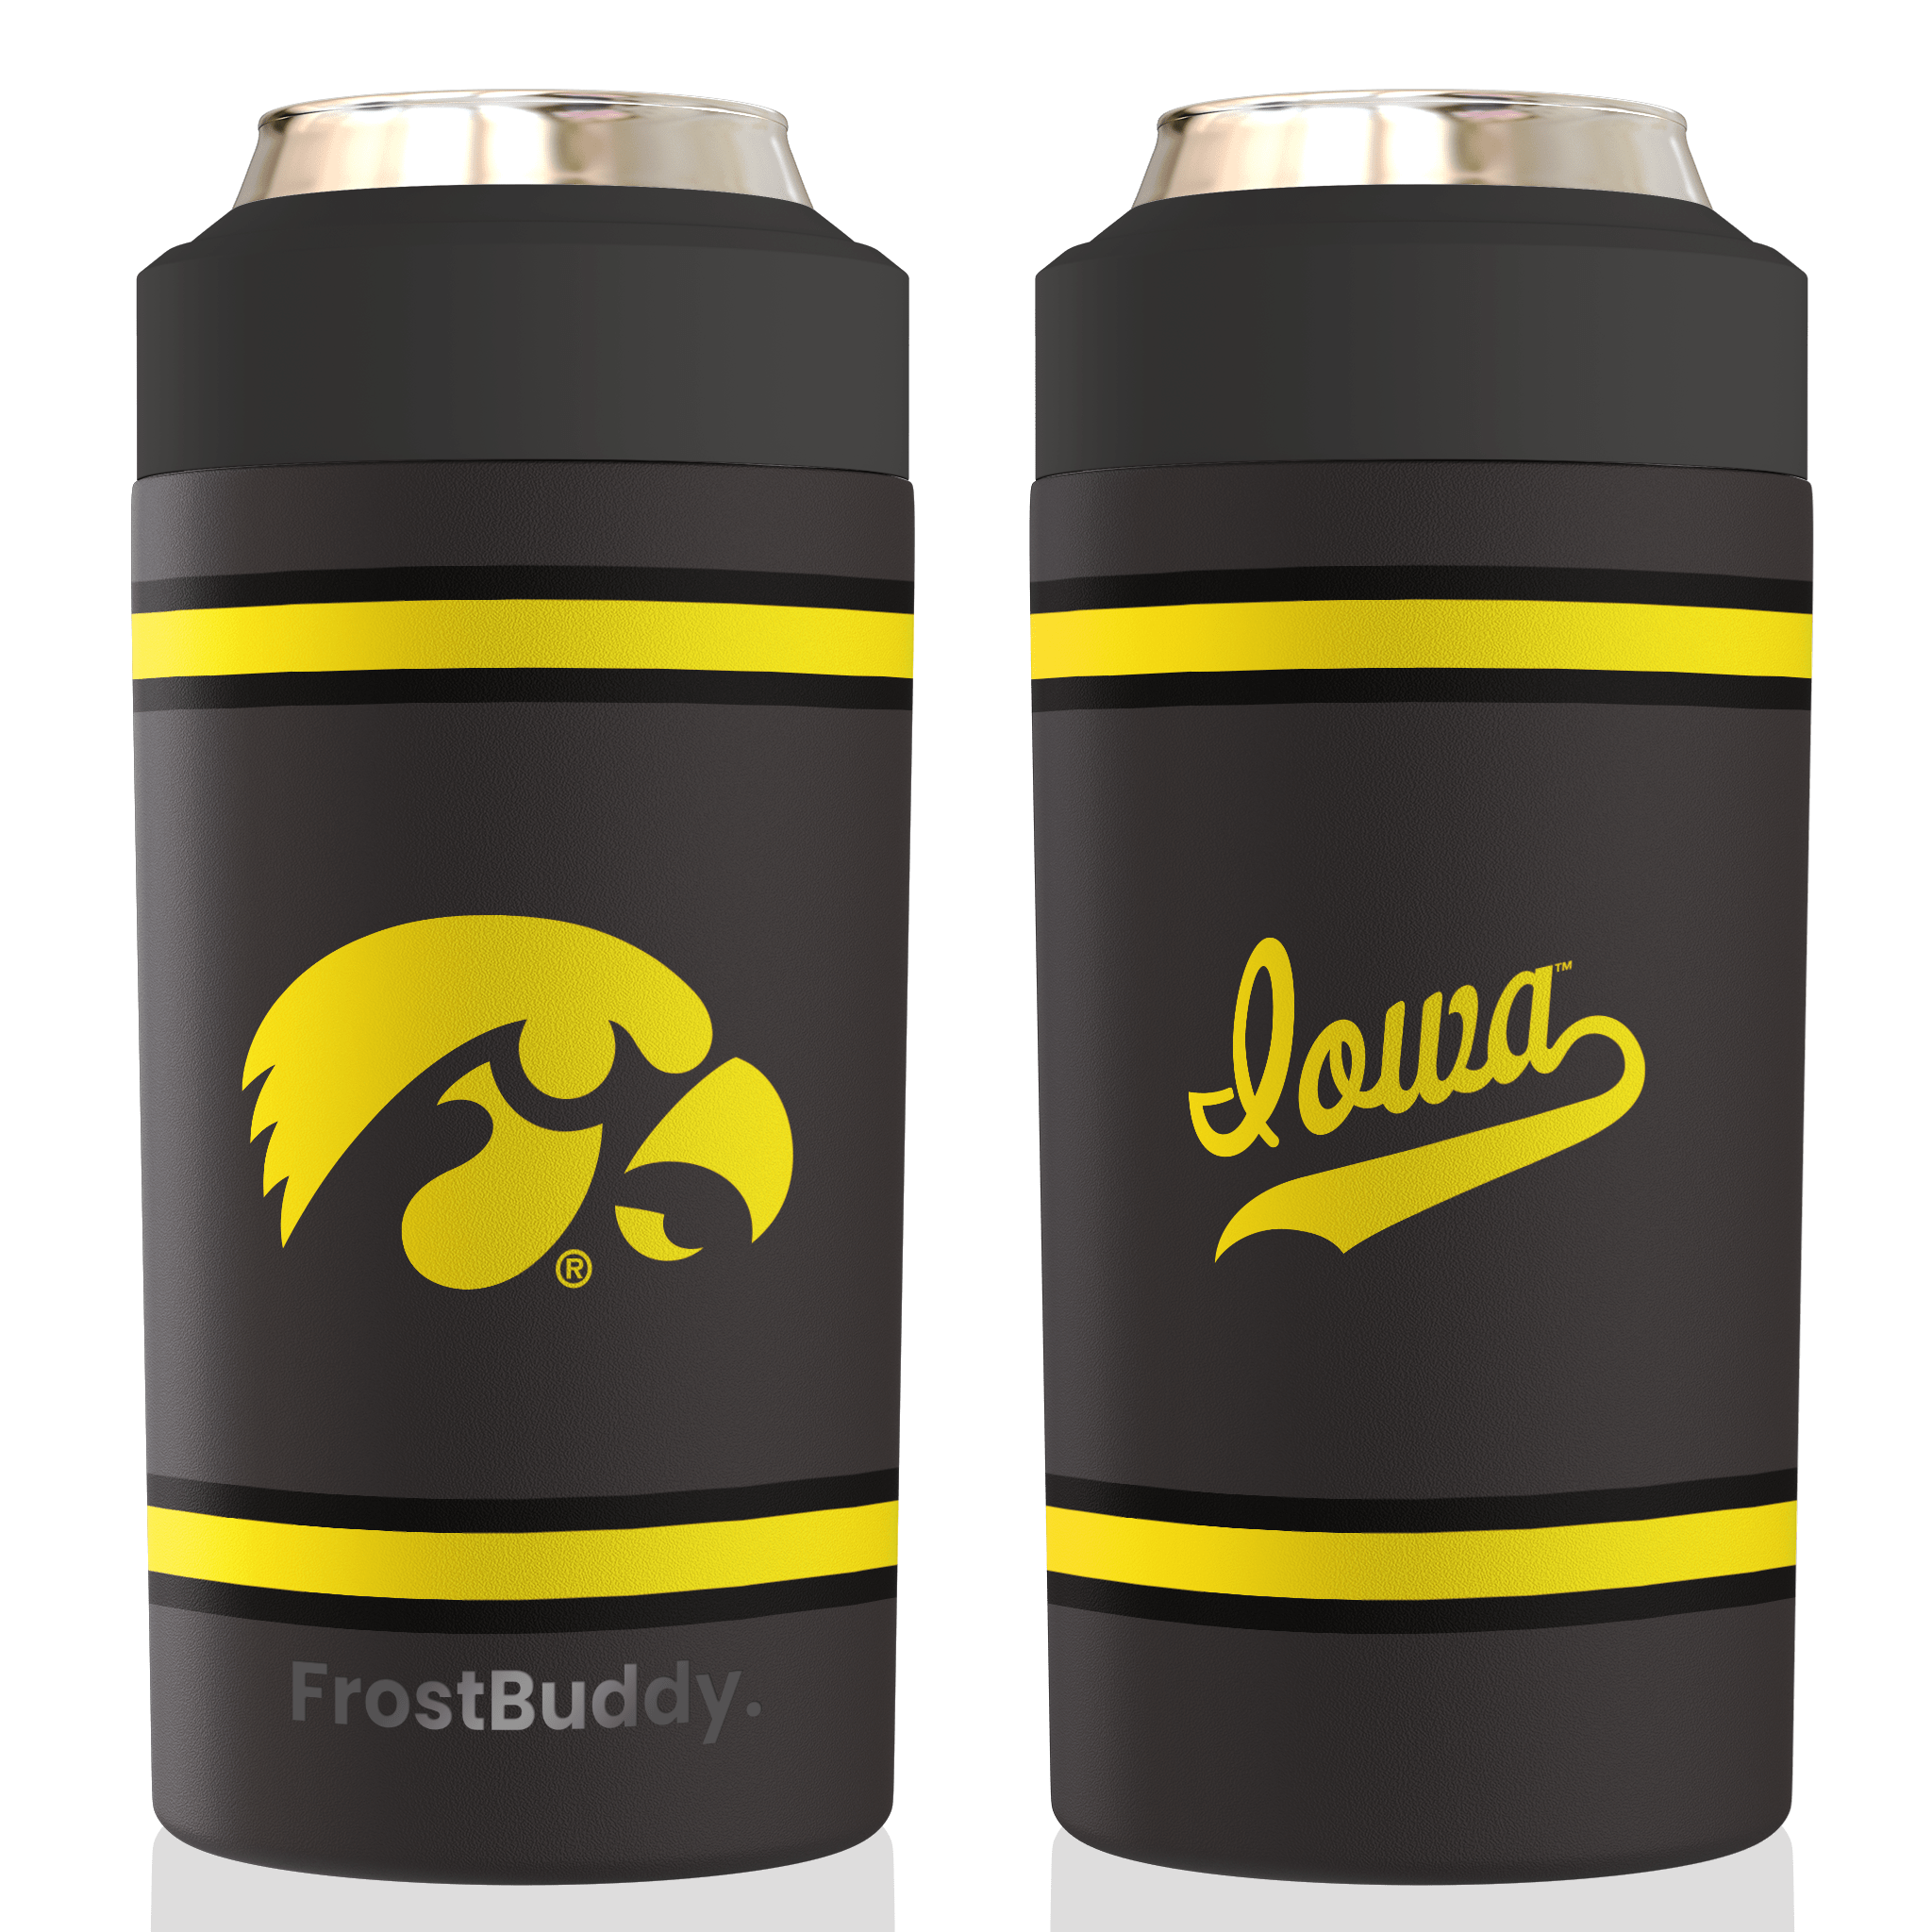 Universal Buddy | University of Iowa - Holds 12oz Cans, Slim Cans, Bottles, 16oz Cans & Bottles - Keep Your Drink Cold for 12+ Hours | Frost Buddy